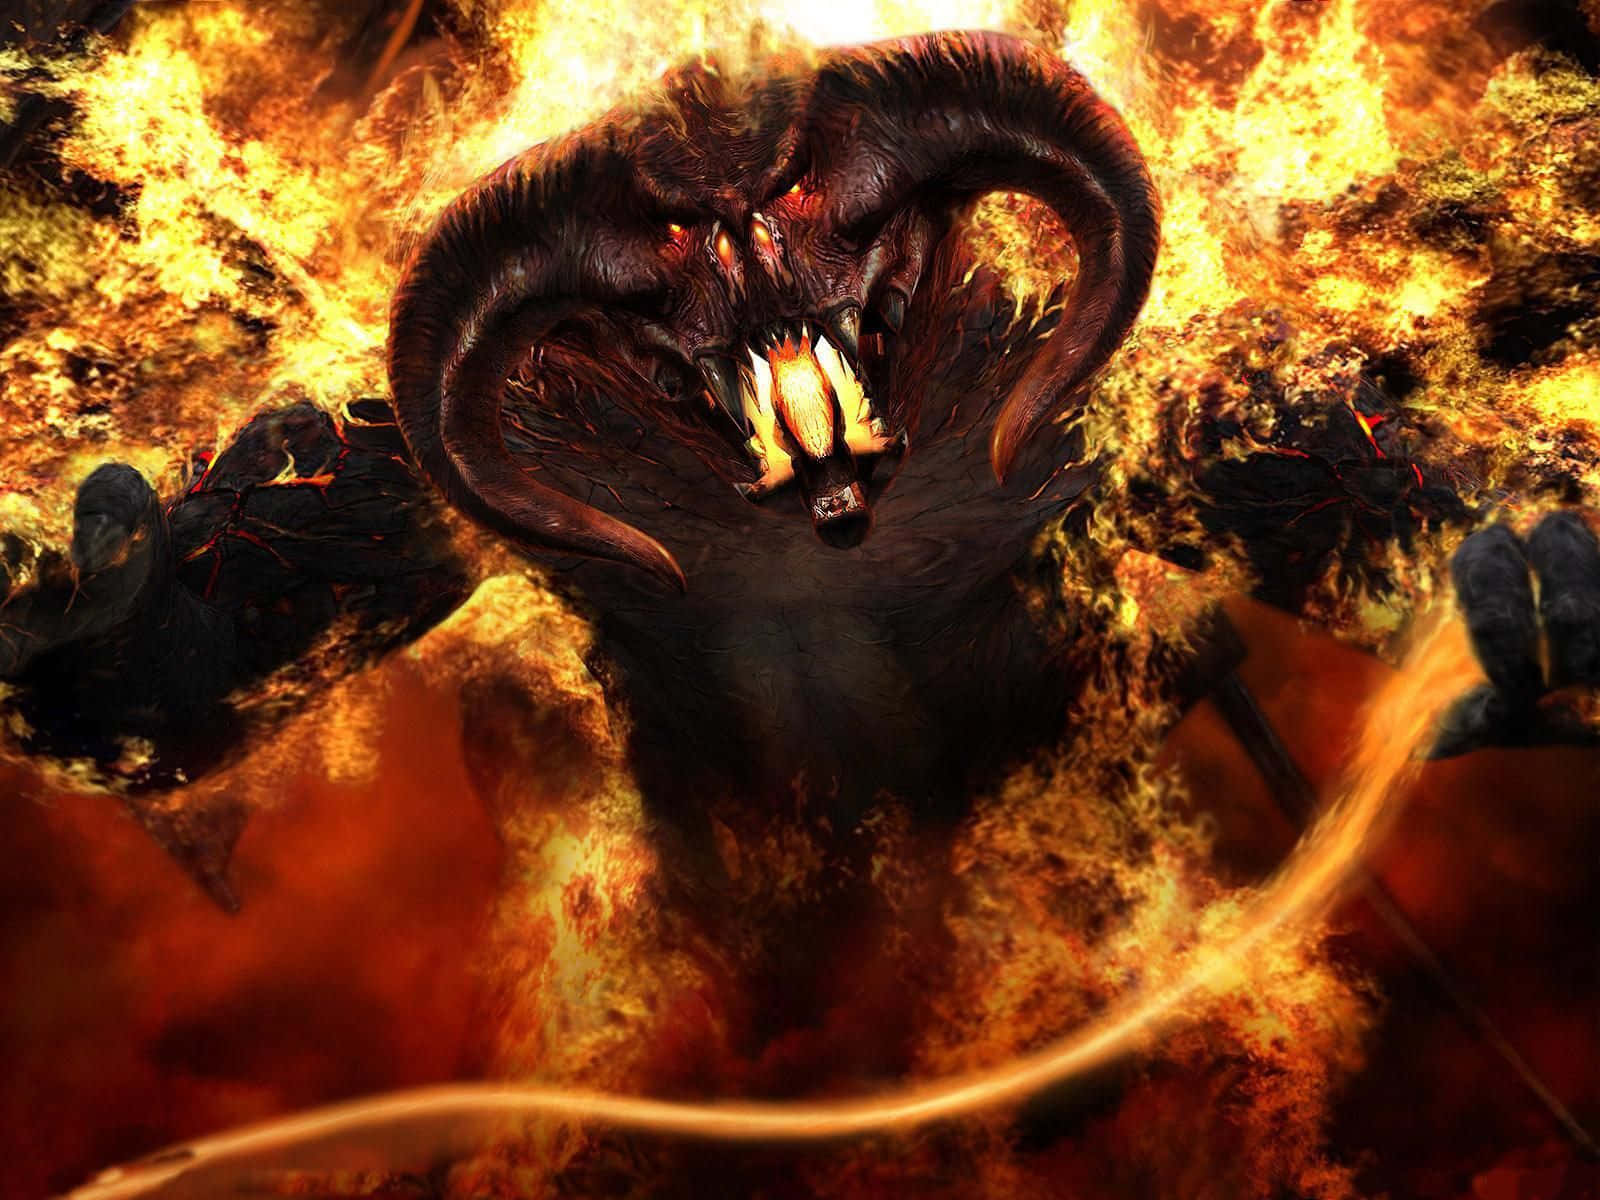 Balrog Scary Monster In Fire Pictures 1600 x 1200 Picture